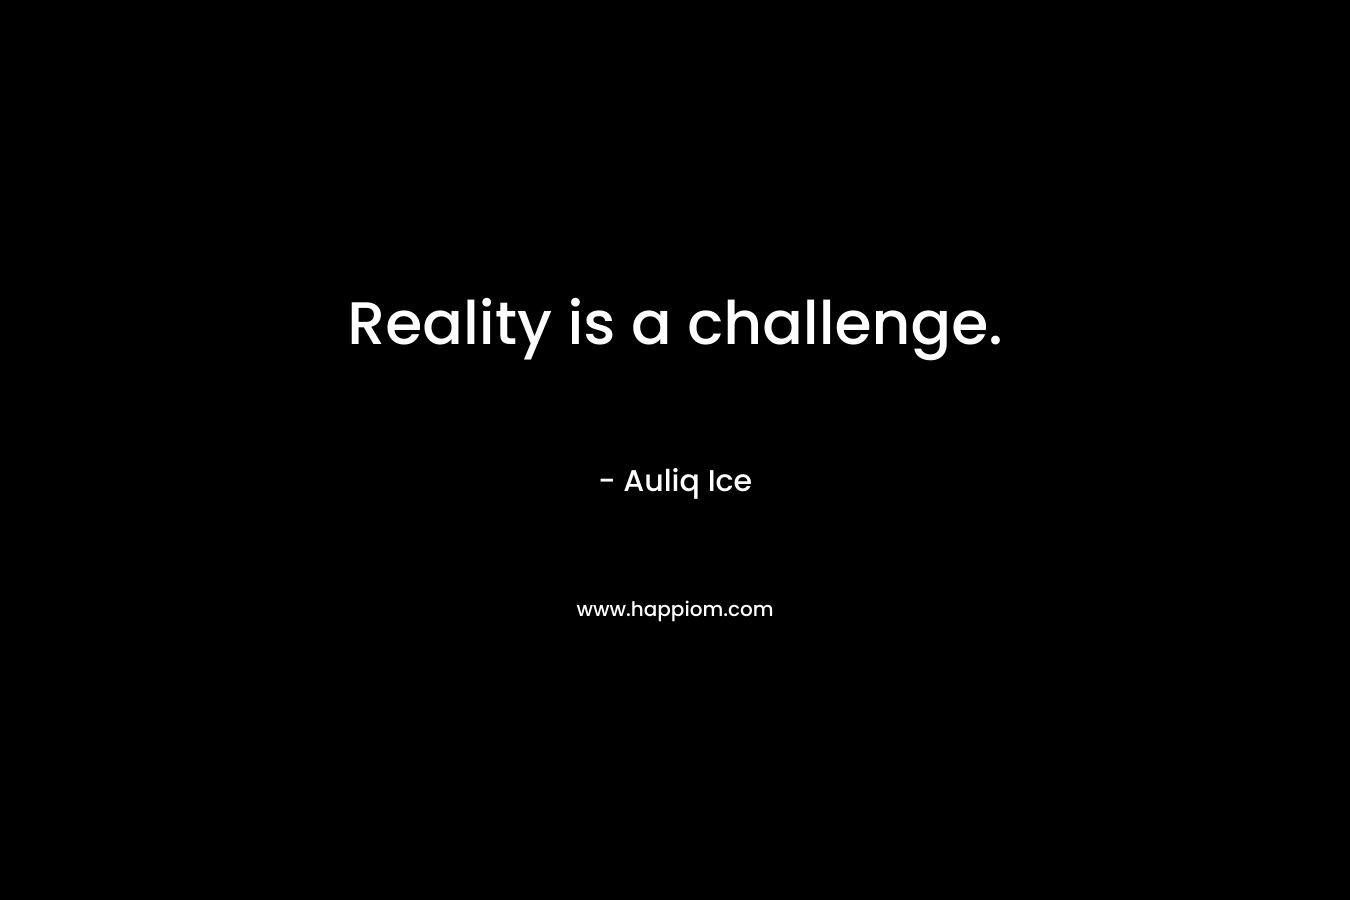 Reality is a challenge.